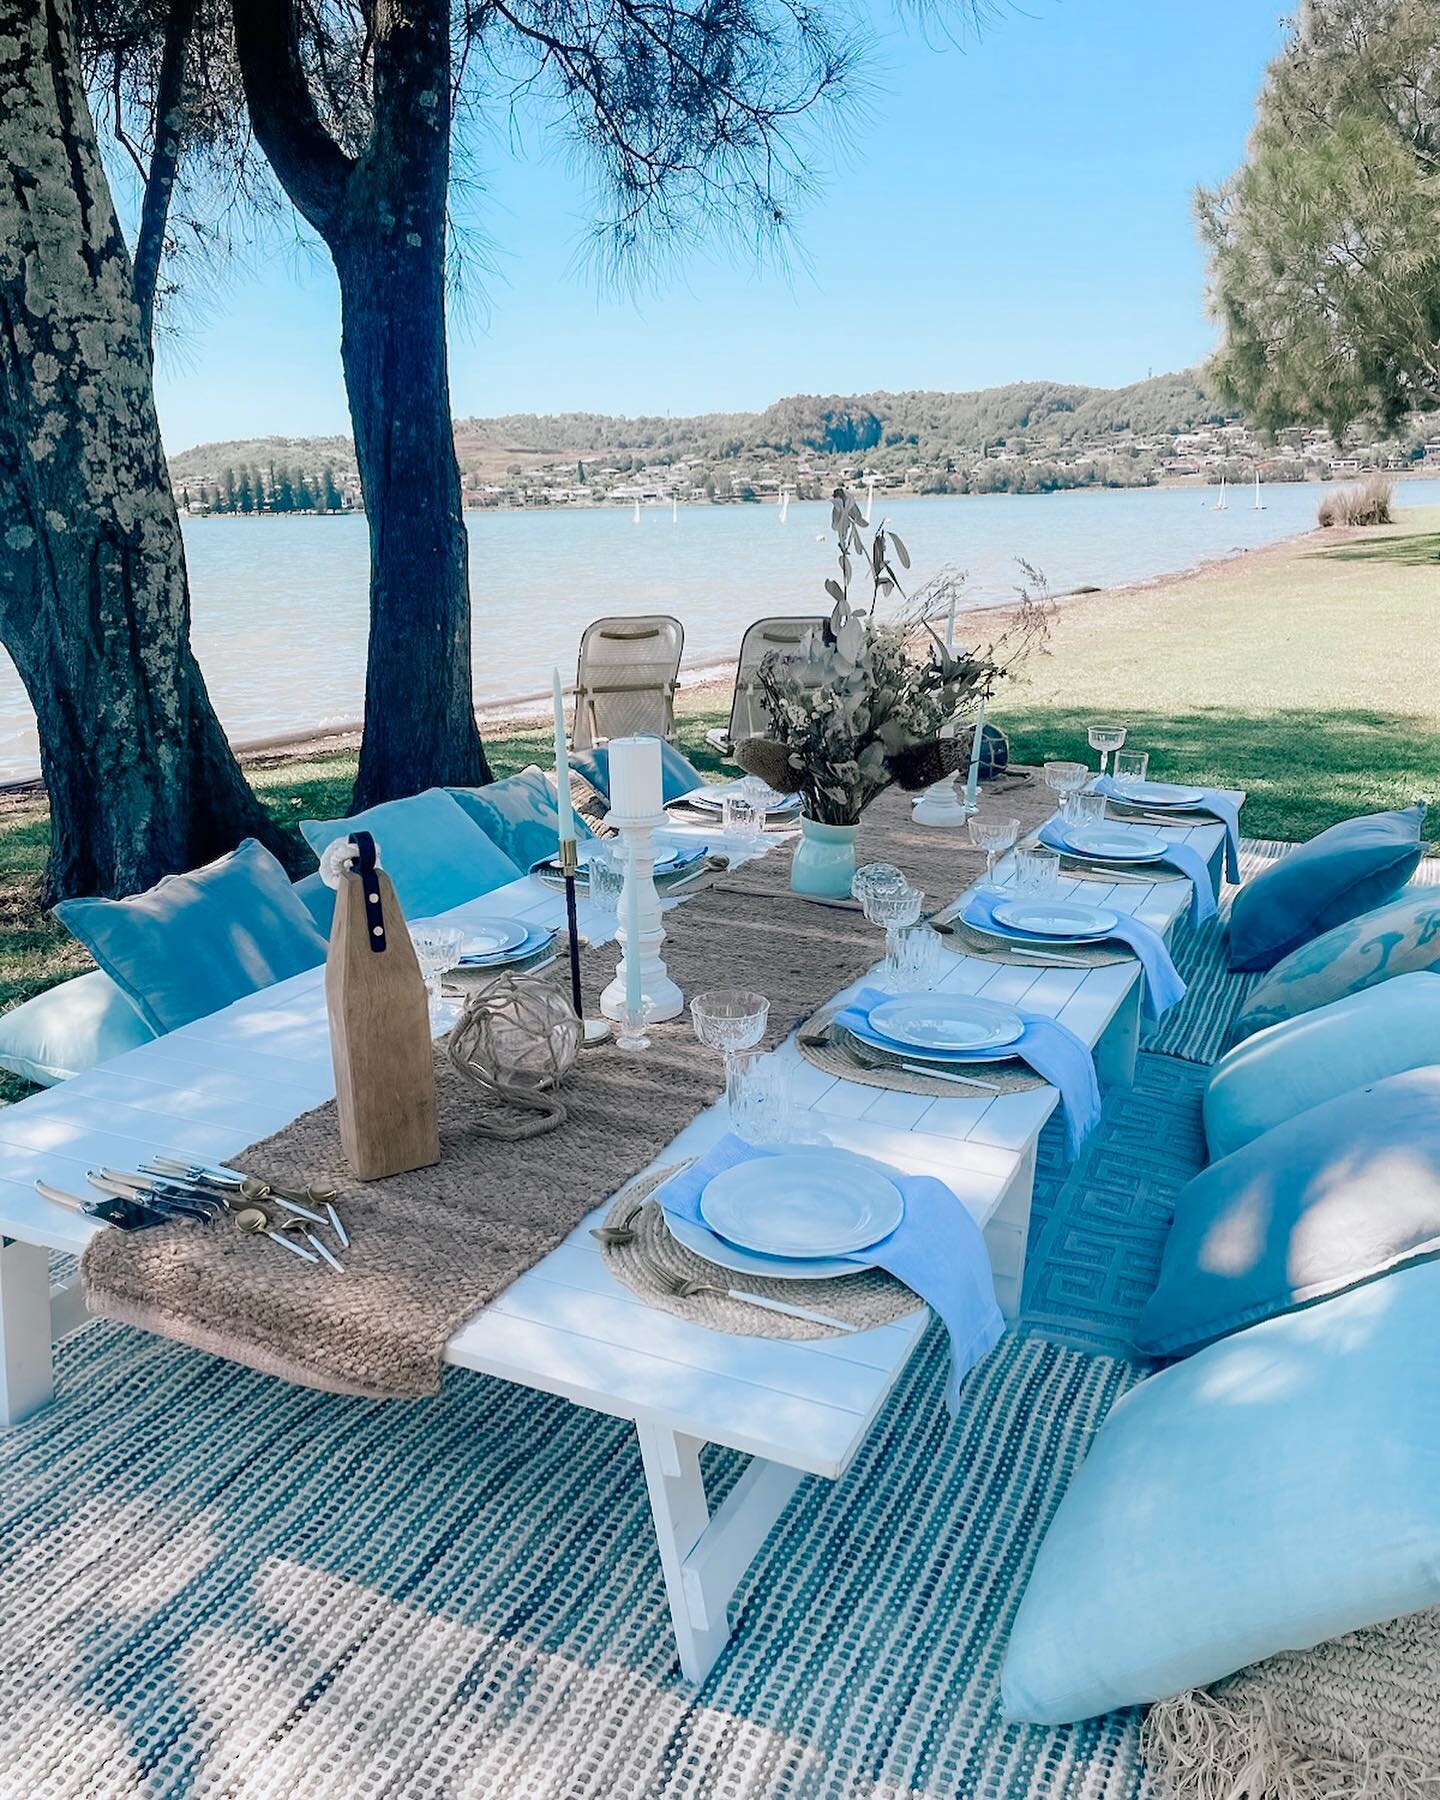 Happy place. 🤍 Celebrating life and love with a #HouseofHamptons luxury picnic by the lake. 

Enquiries: hello@luxelakeside.com.au 

LL x

#luxurypicnic #luxurypicnics #luxurypicnicservice #luxurypicnicplanner #picnicsetup #picnicstyling #picnicidea